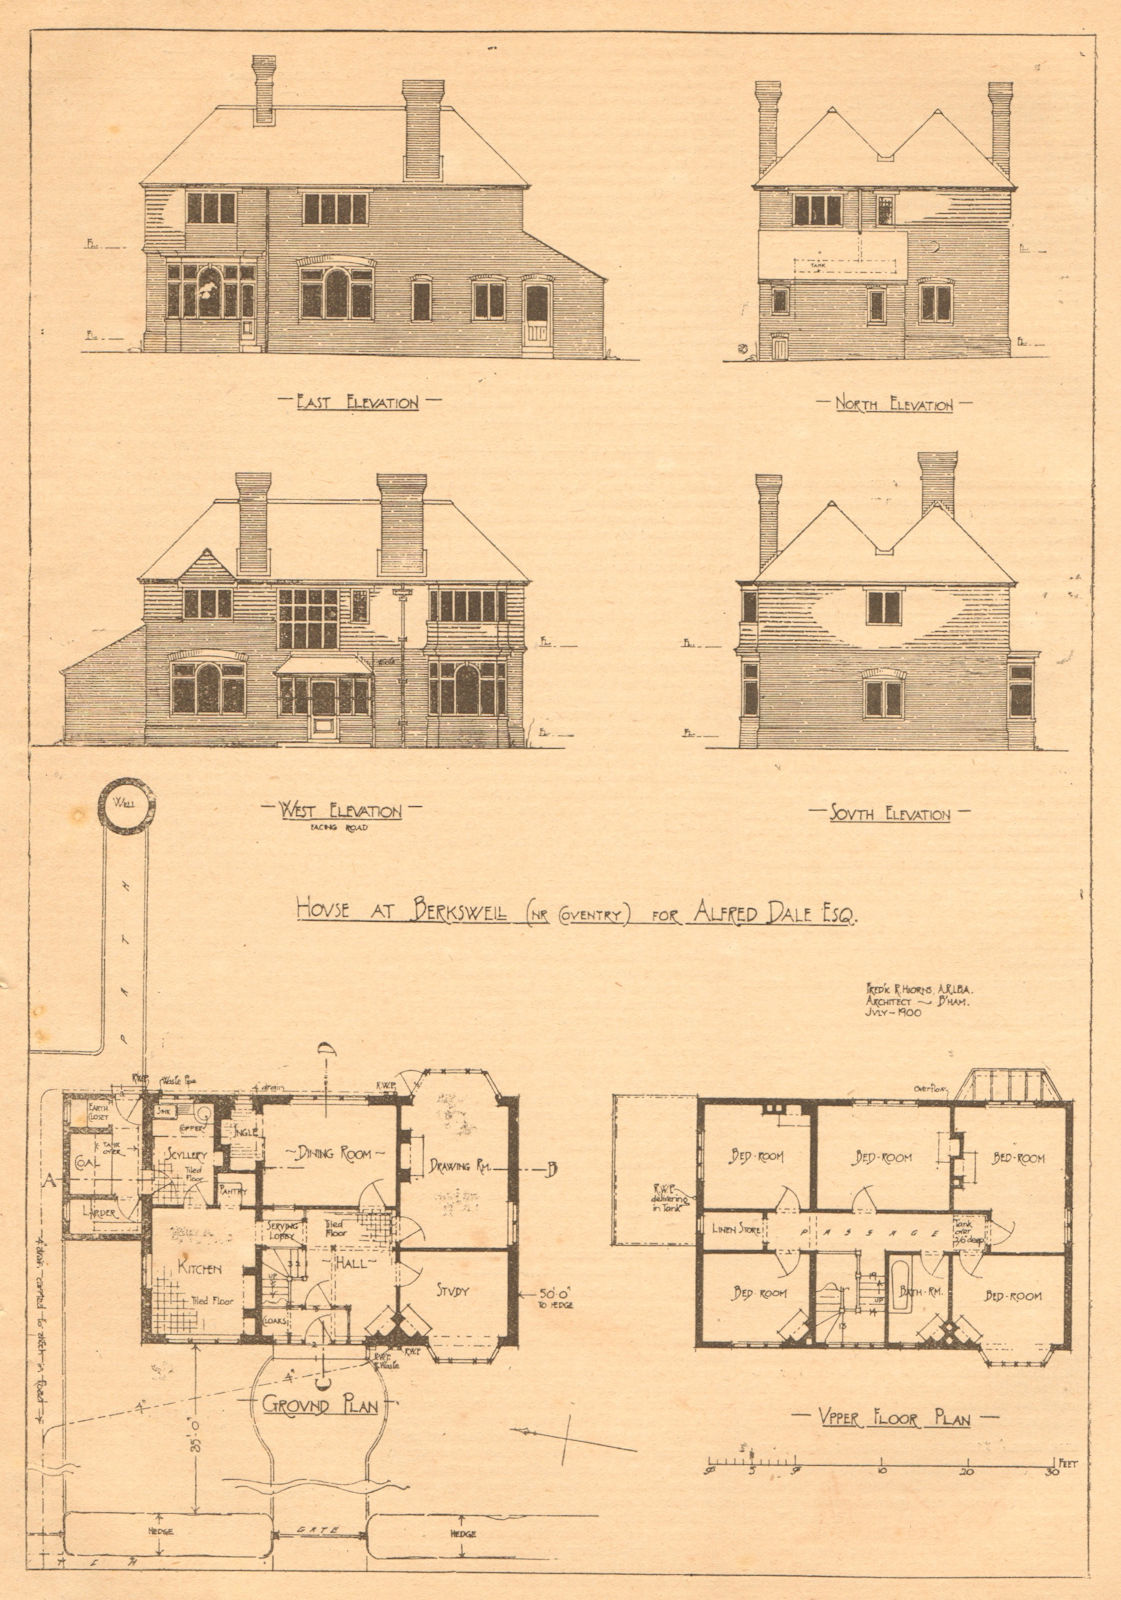 Associate Product House at Berkswell, Coventry for Alfred Dale. Elevations plan. Warwickshire 1900